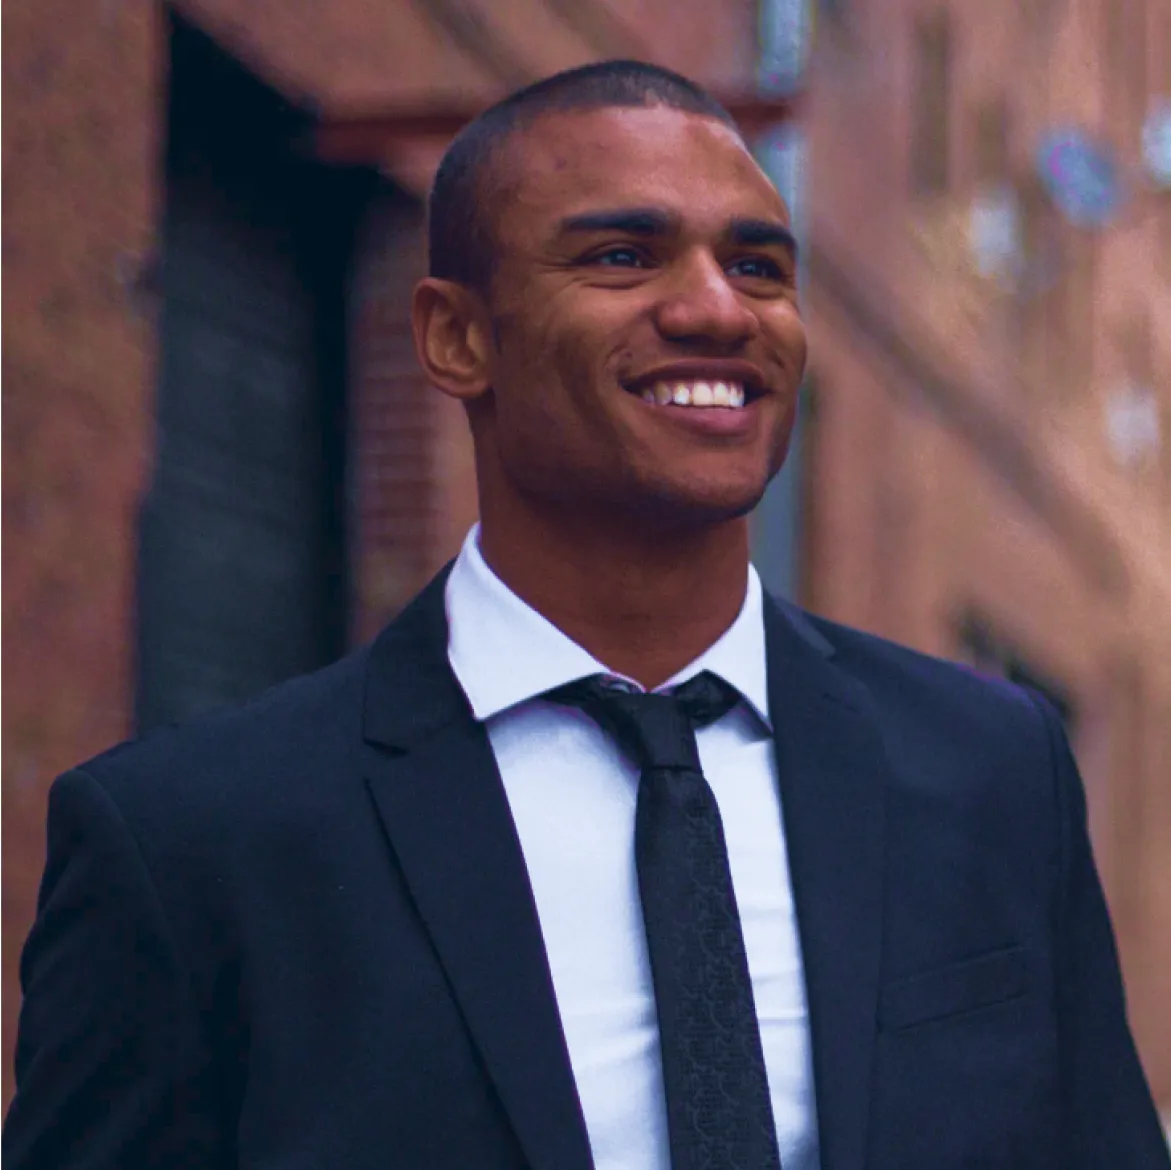 man in a navy blue suit with a tie in an urbanistic scene